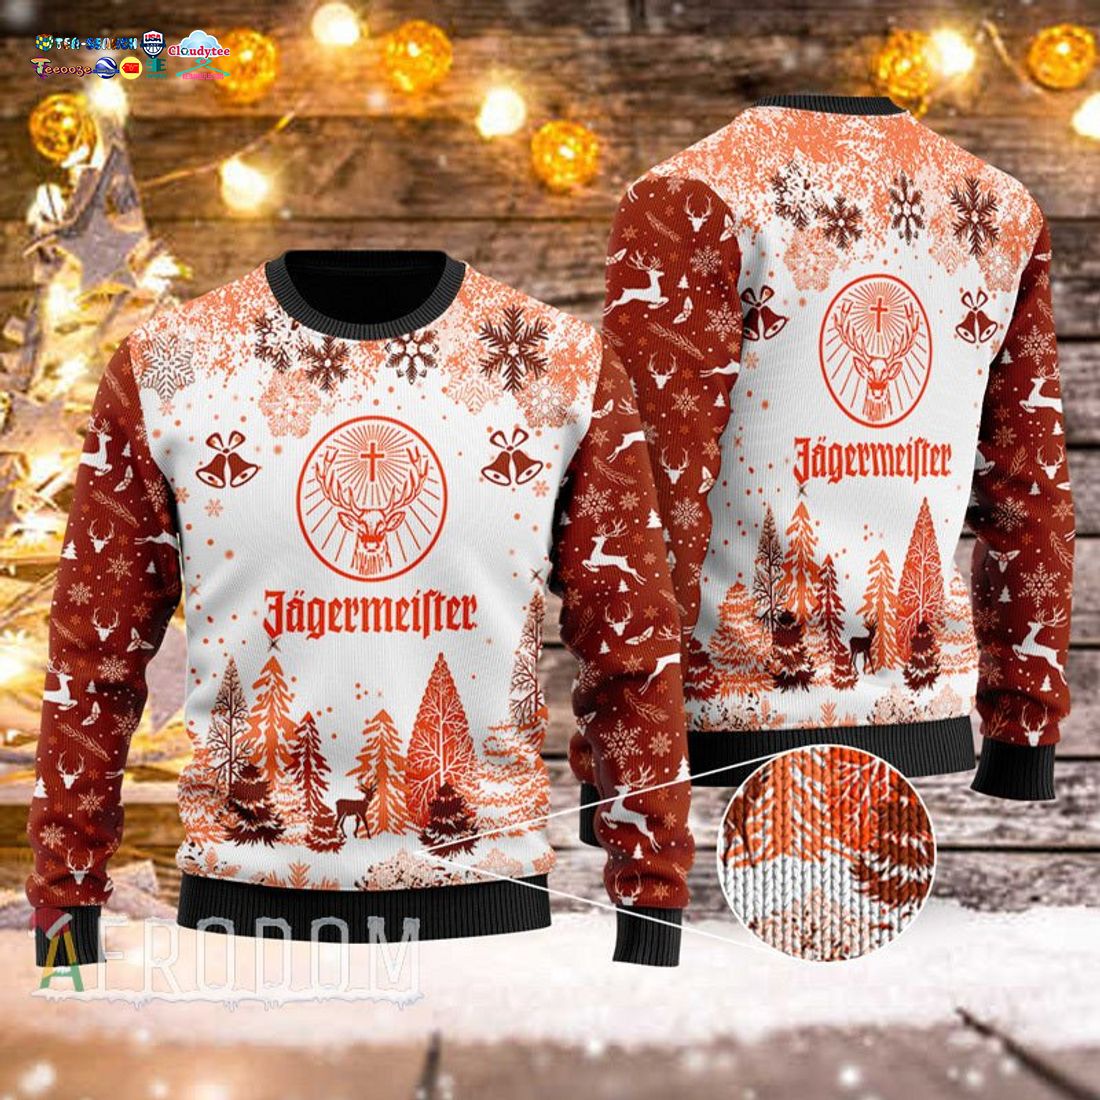 Jagermeister Ver 3 Ugly Christmas Sweater